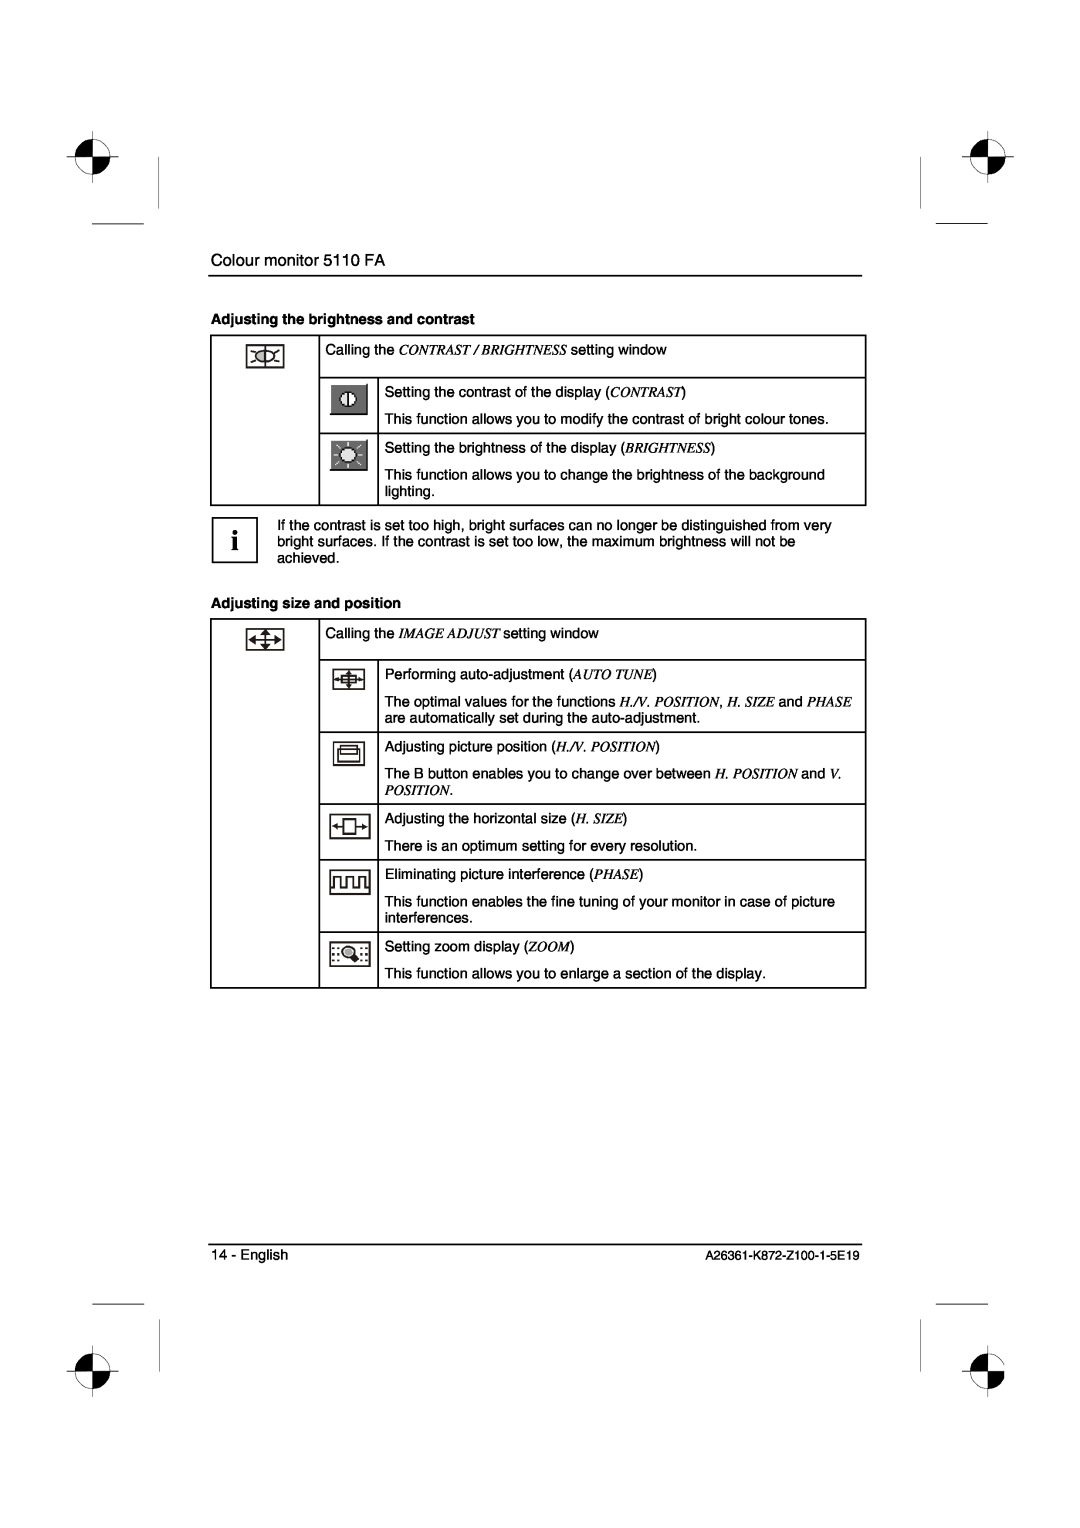 Fujitsu Siemens Computers 5110 FA manual Adjusting the brightness and contrast, Adjusting size and position, Position 